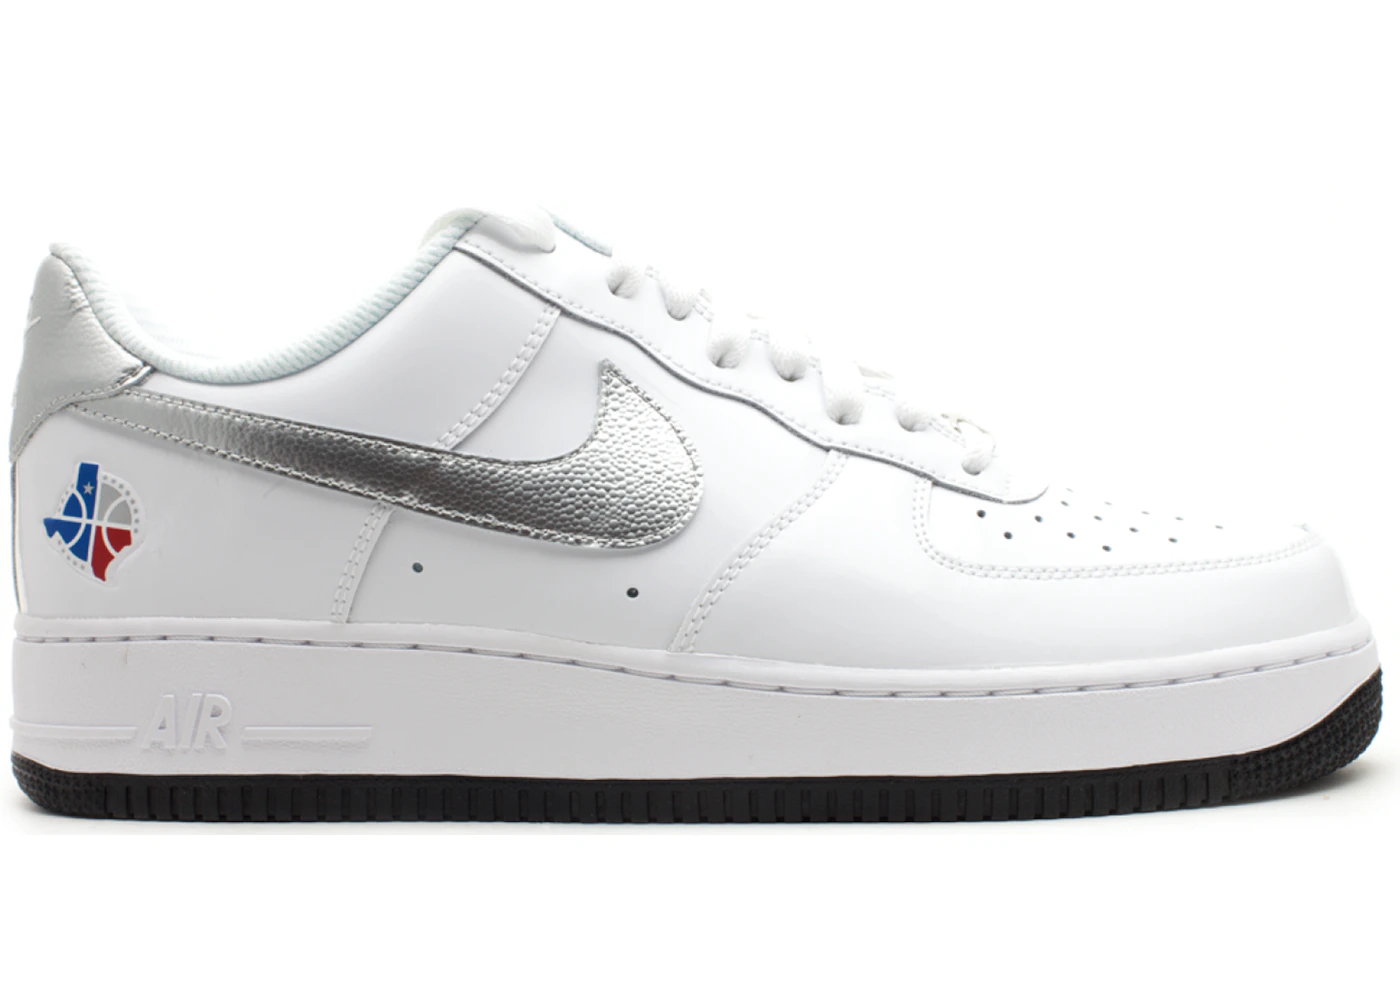 Nike Air Force 1 Low All-Star White (2010) Men's - 315122-120 - US